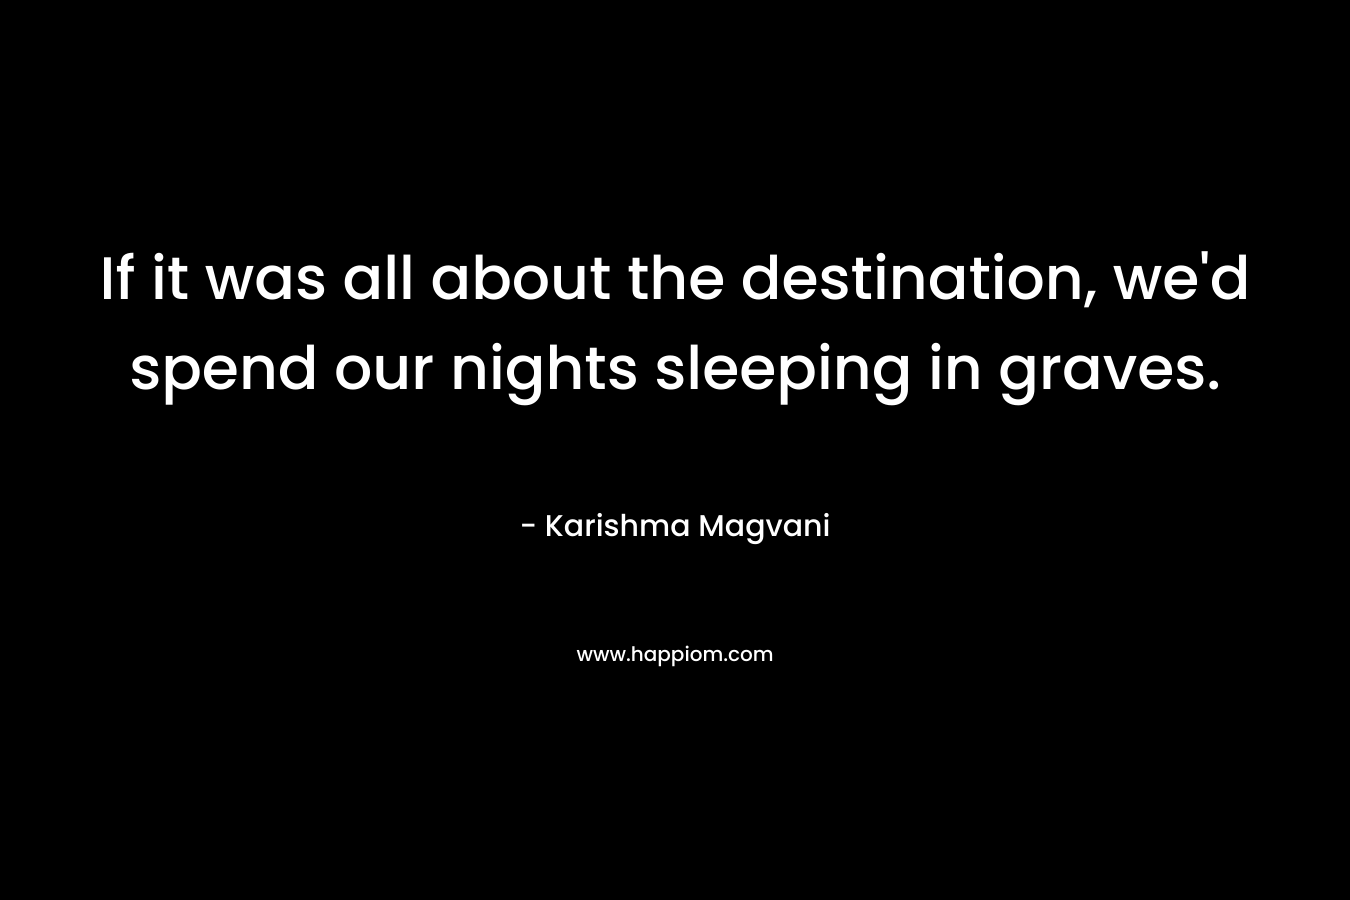 If it was all about the destination, we’d spend our nights sleeping in graves. – Karishma Magvani